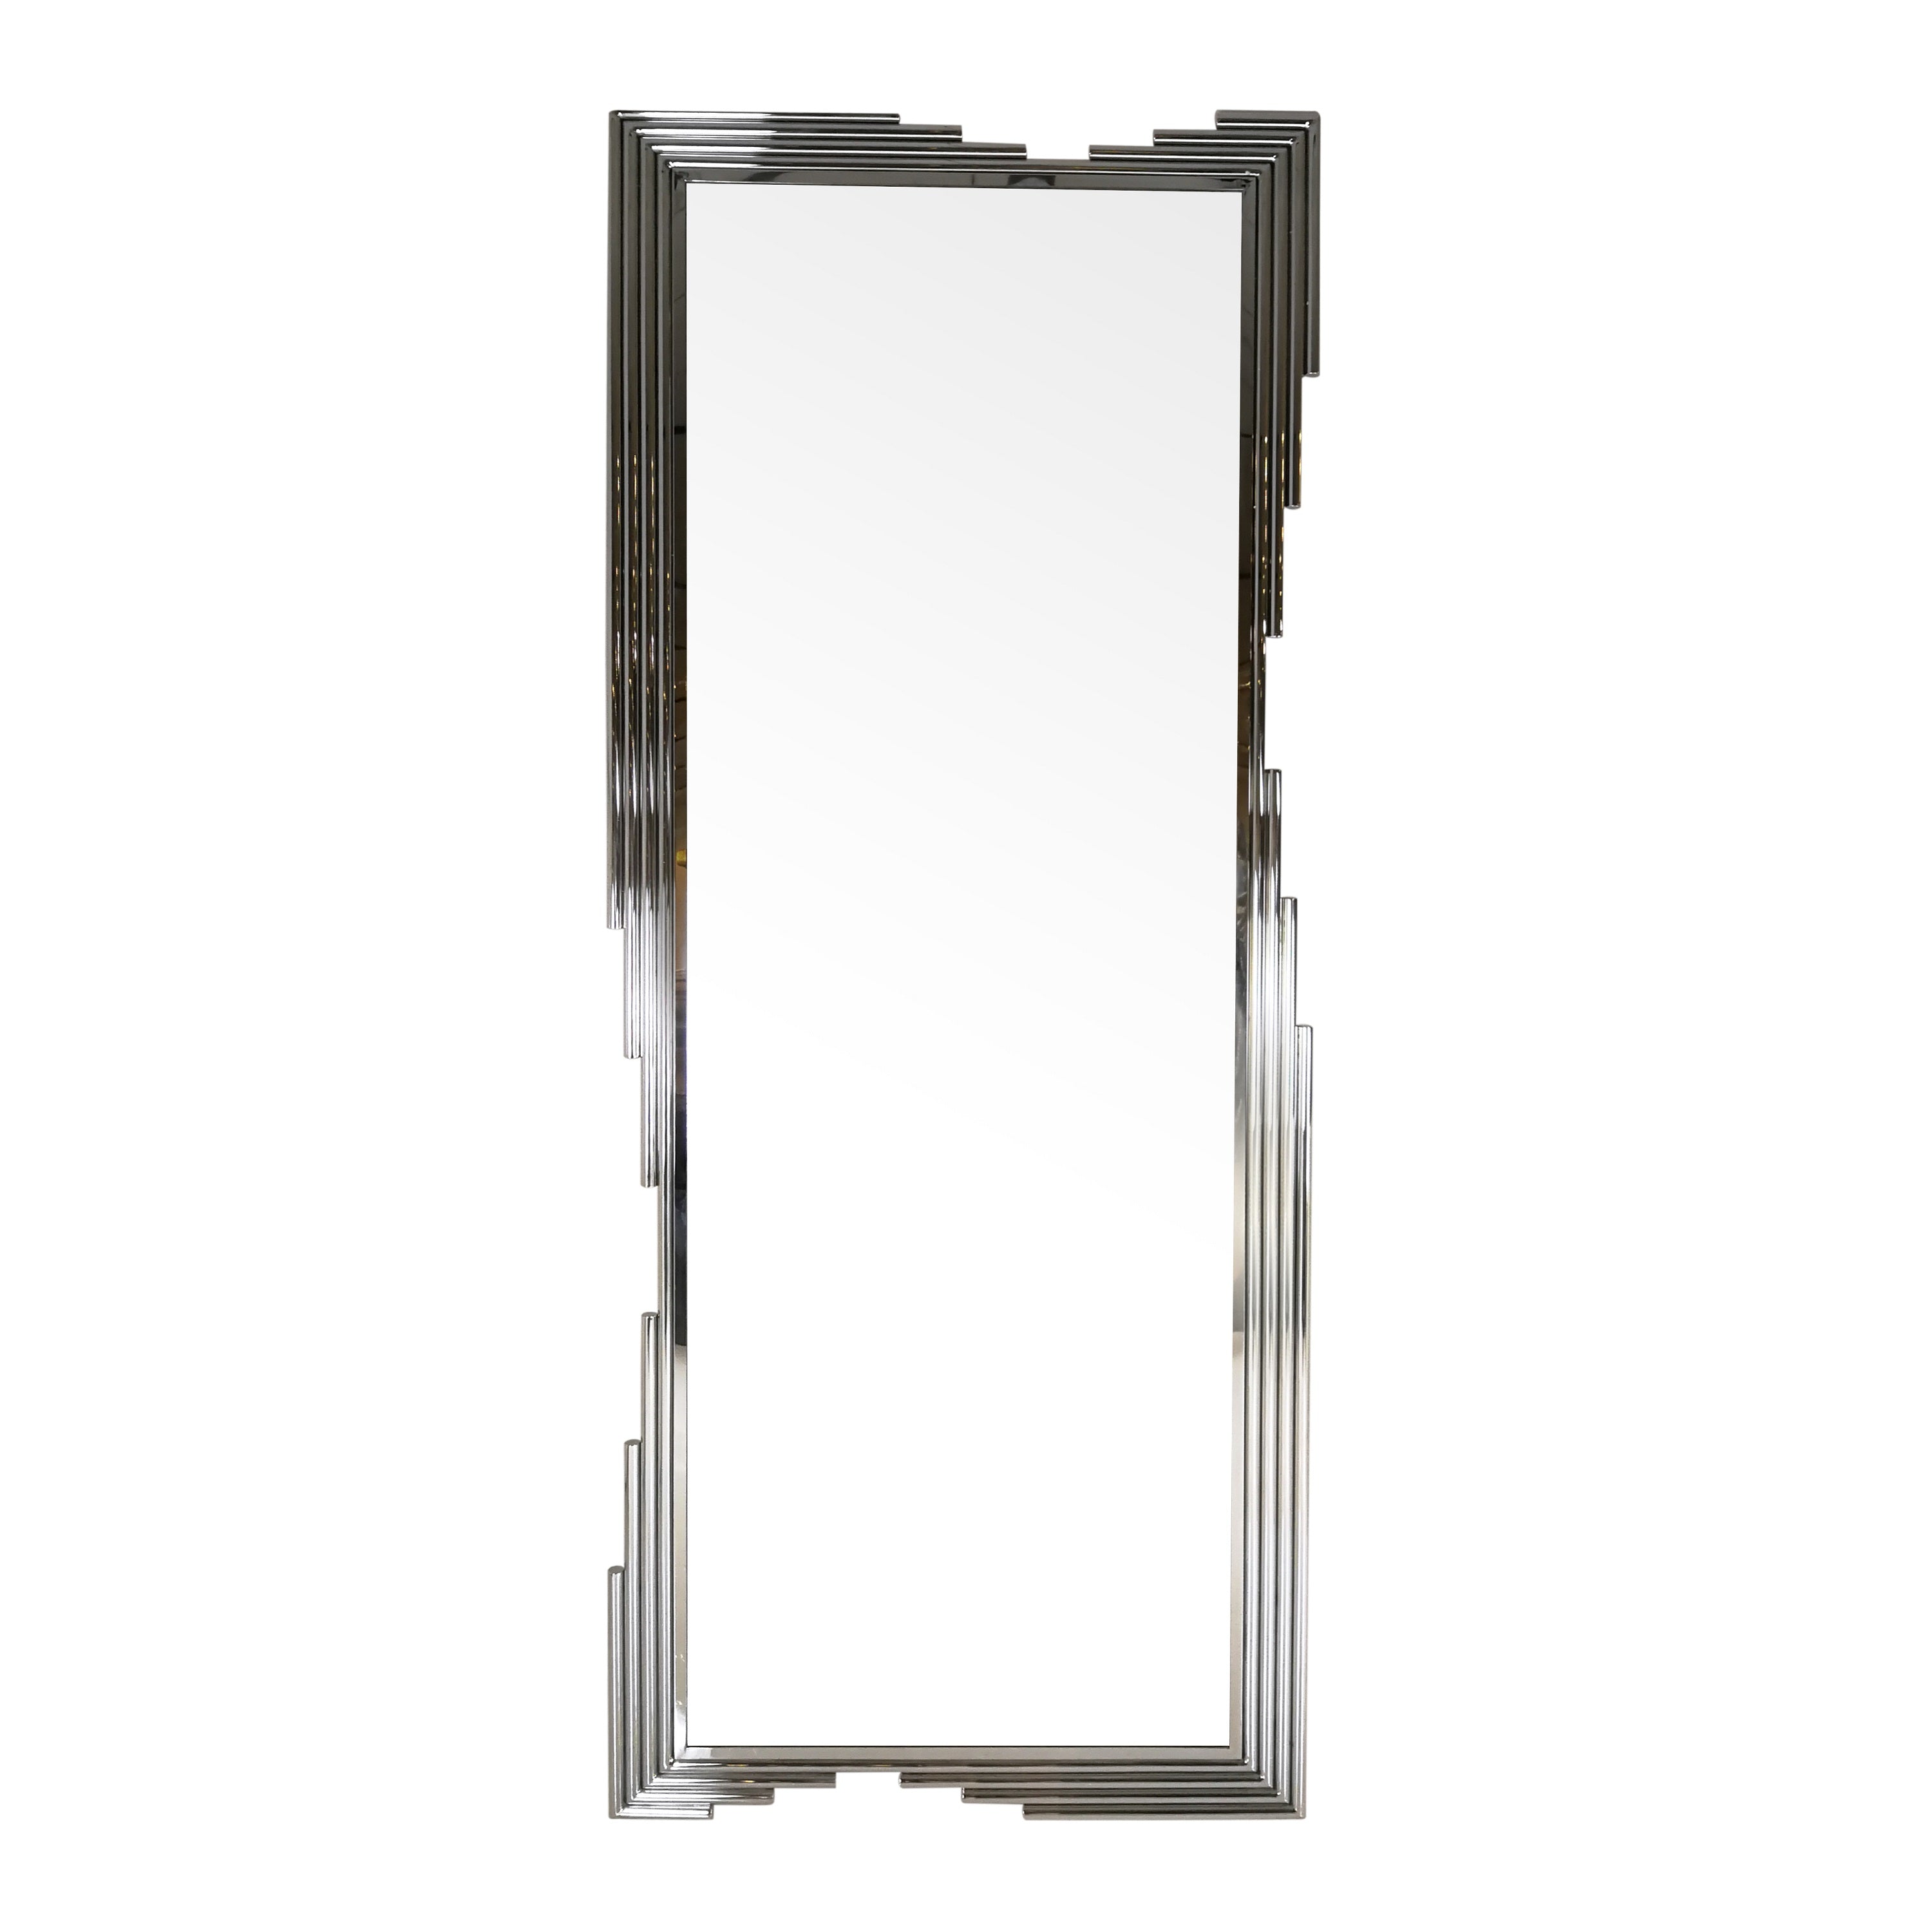 PAAC014A - Floor Mirror 31.5"W x 78.8"H Stainless Steel Polished- 46606